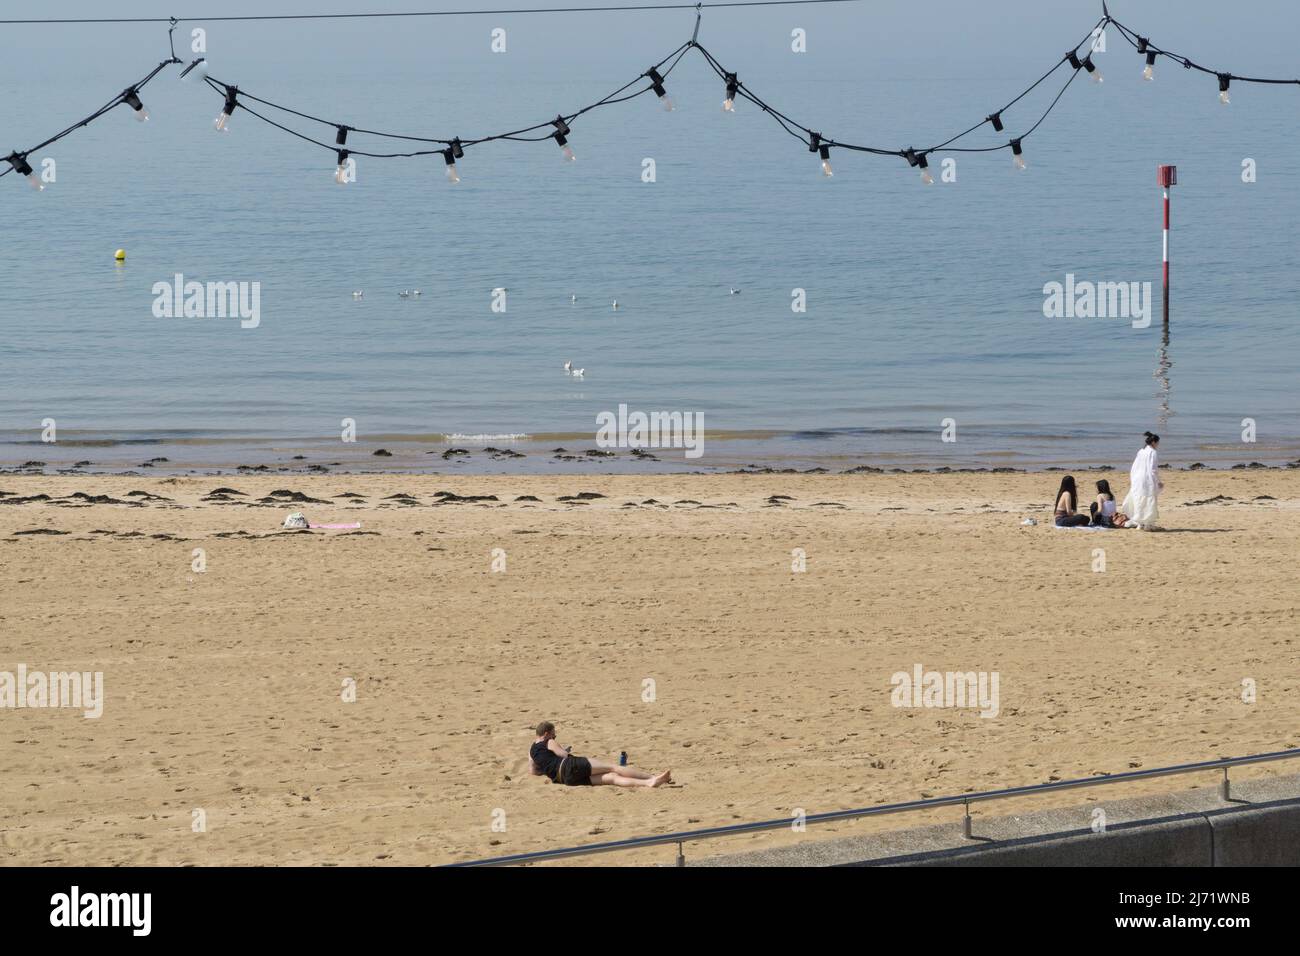 UK weather, Margate, Kent: A warm spell has started and the beach and saltwater lido at Margate are ready for visitors, with temperatures expected to reach 20c tomorrow. Sunshine, clear blue skies and calm water are already attracting people of all ages to the beach. Anna Watson/Alamy Live News Stock Photo